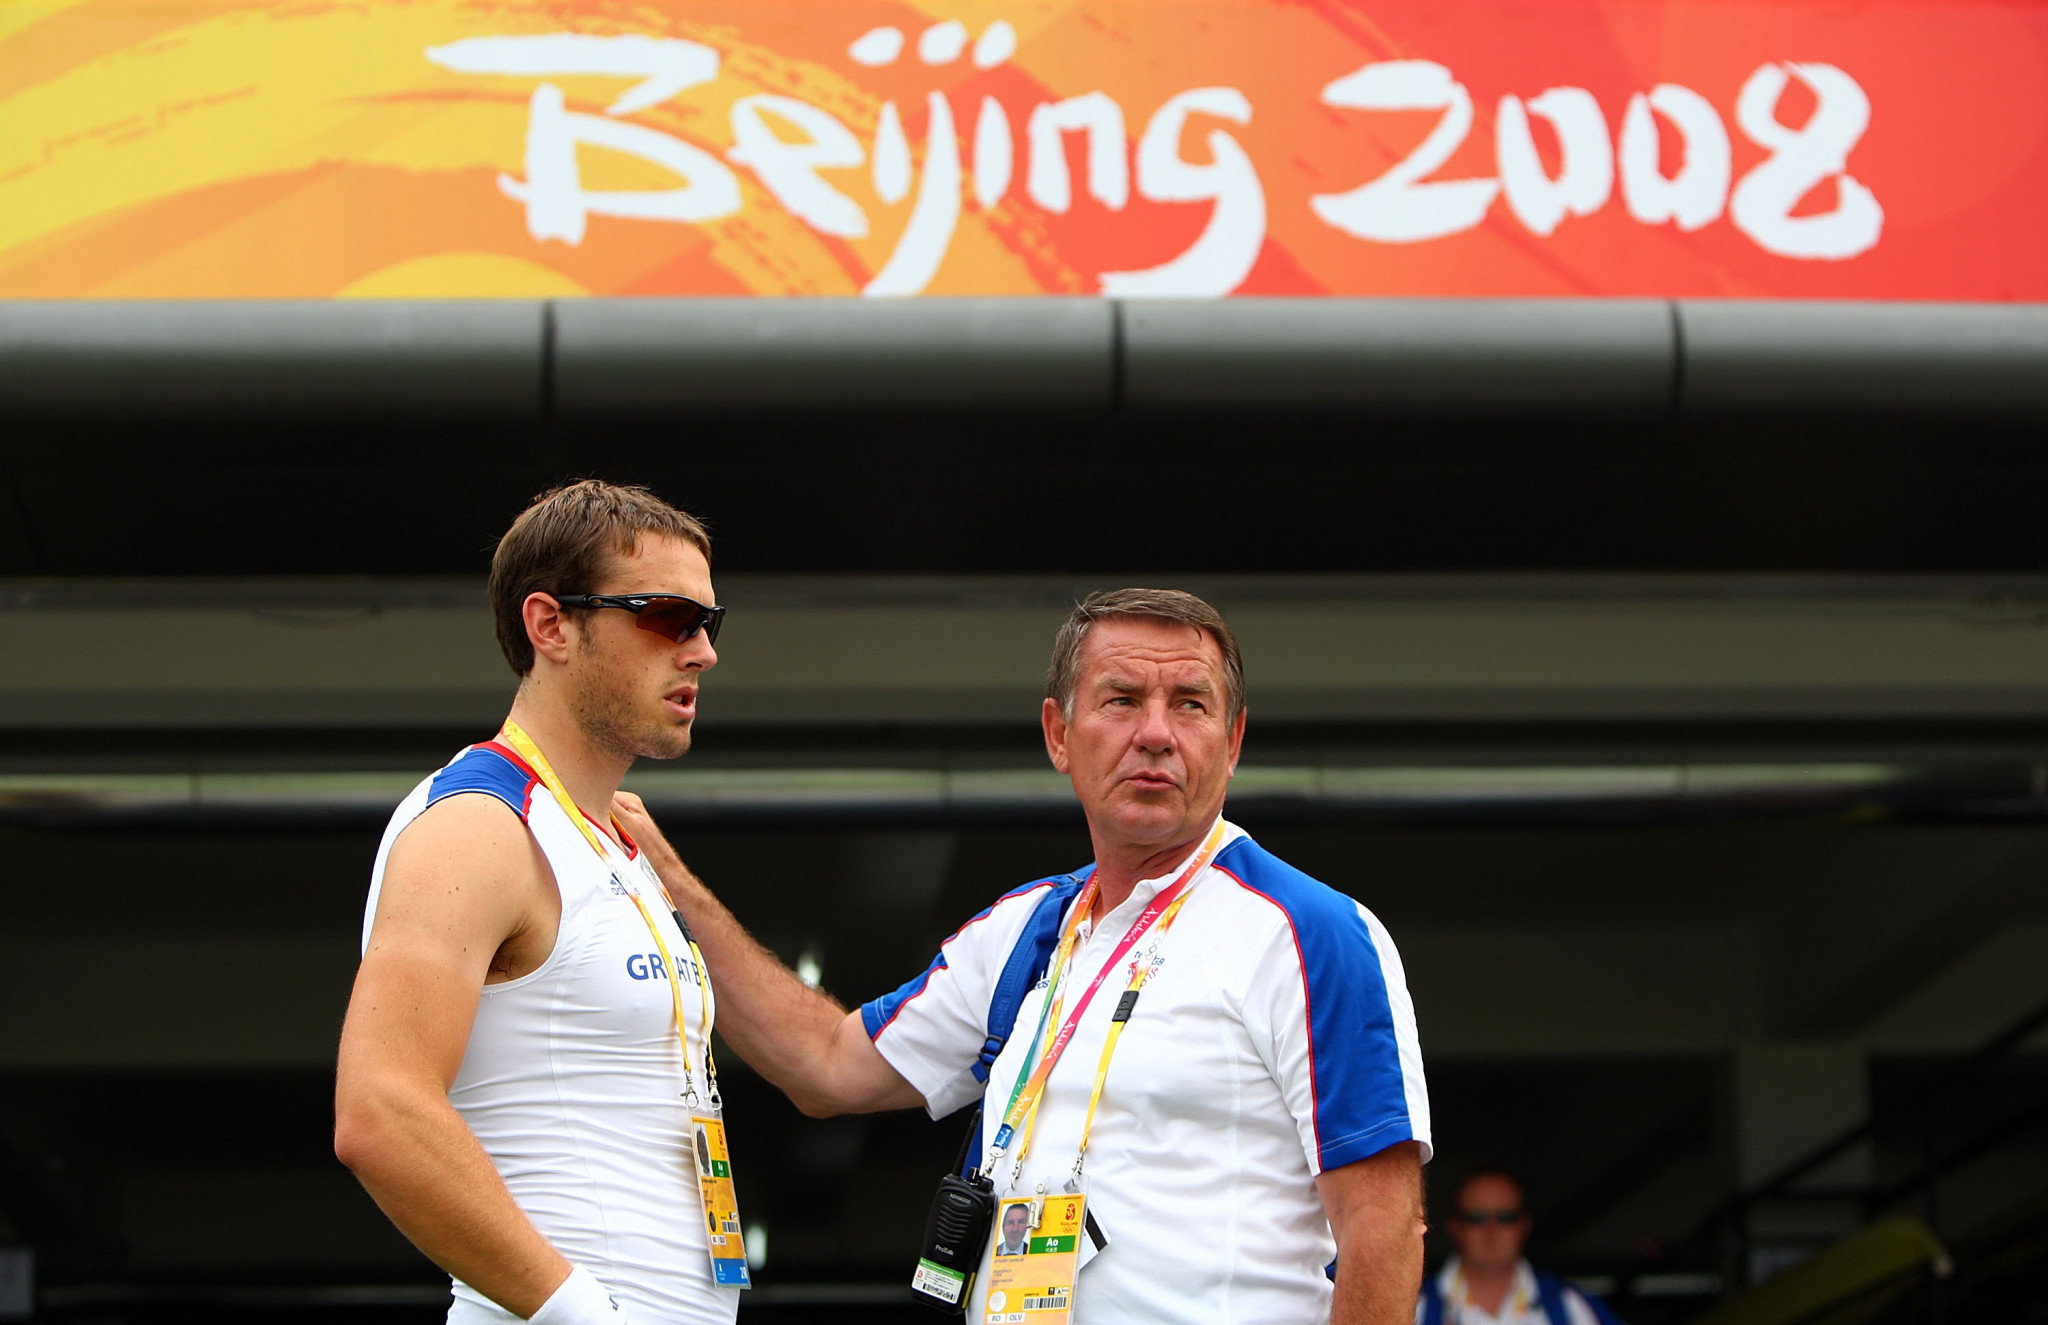 Jürgen Grobler, right, was a British Rowing coach for 29 years ©Getty Images